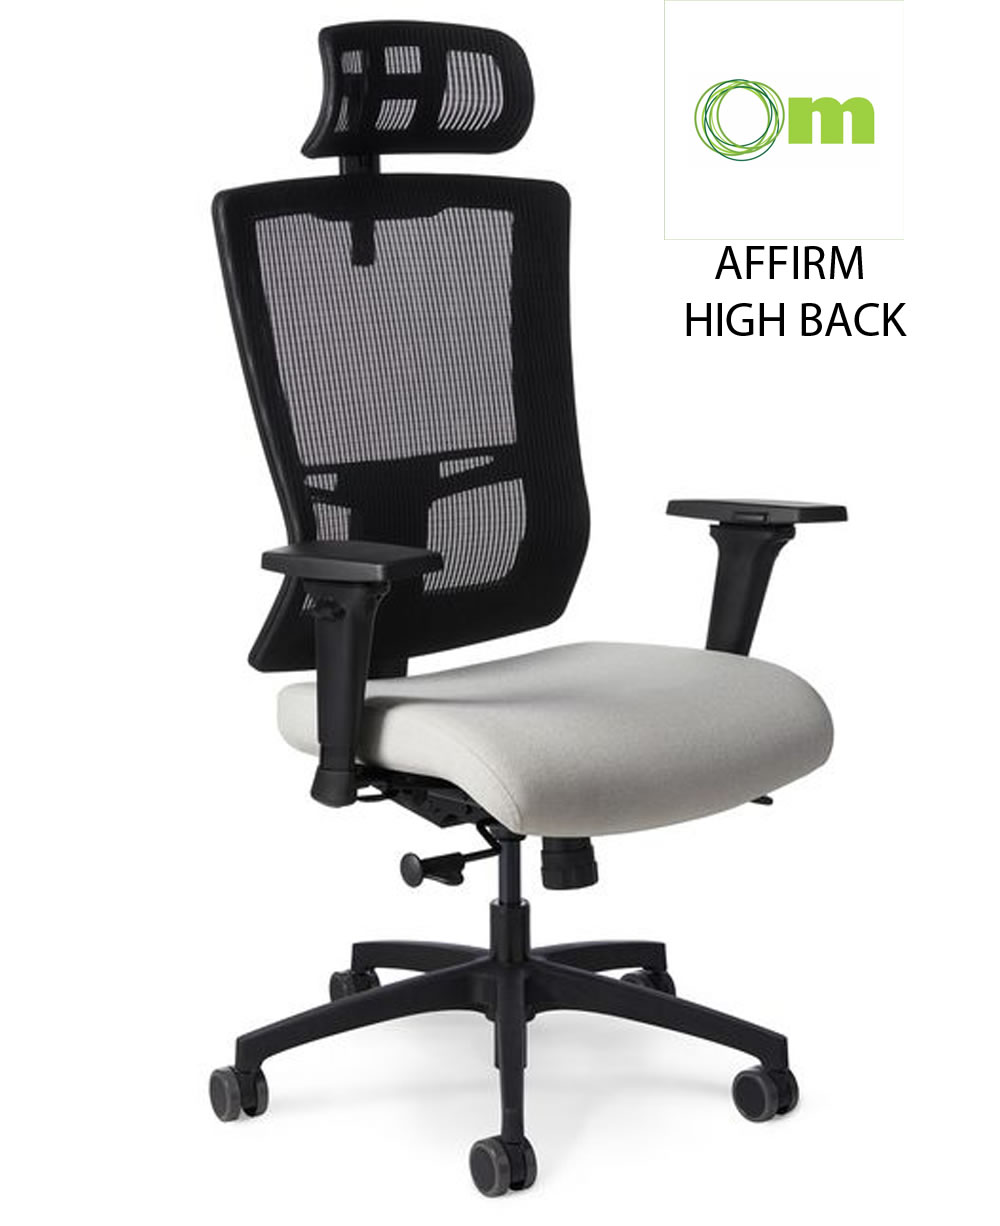 OFFICE MASTER AFFIRM CHAIR